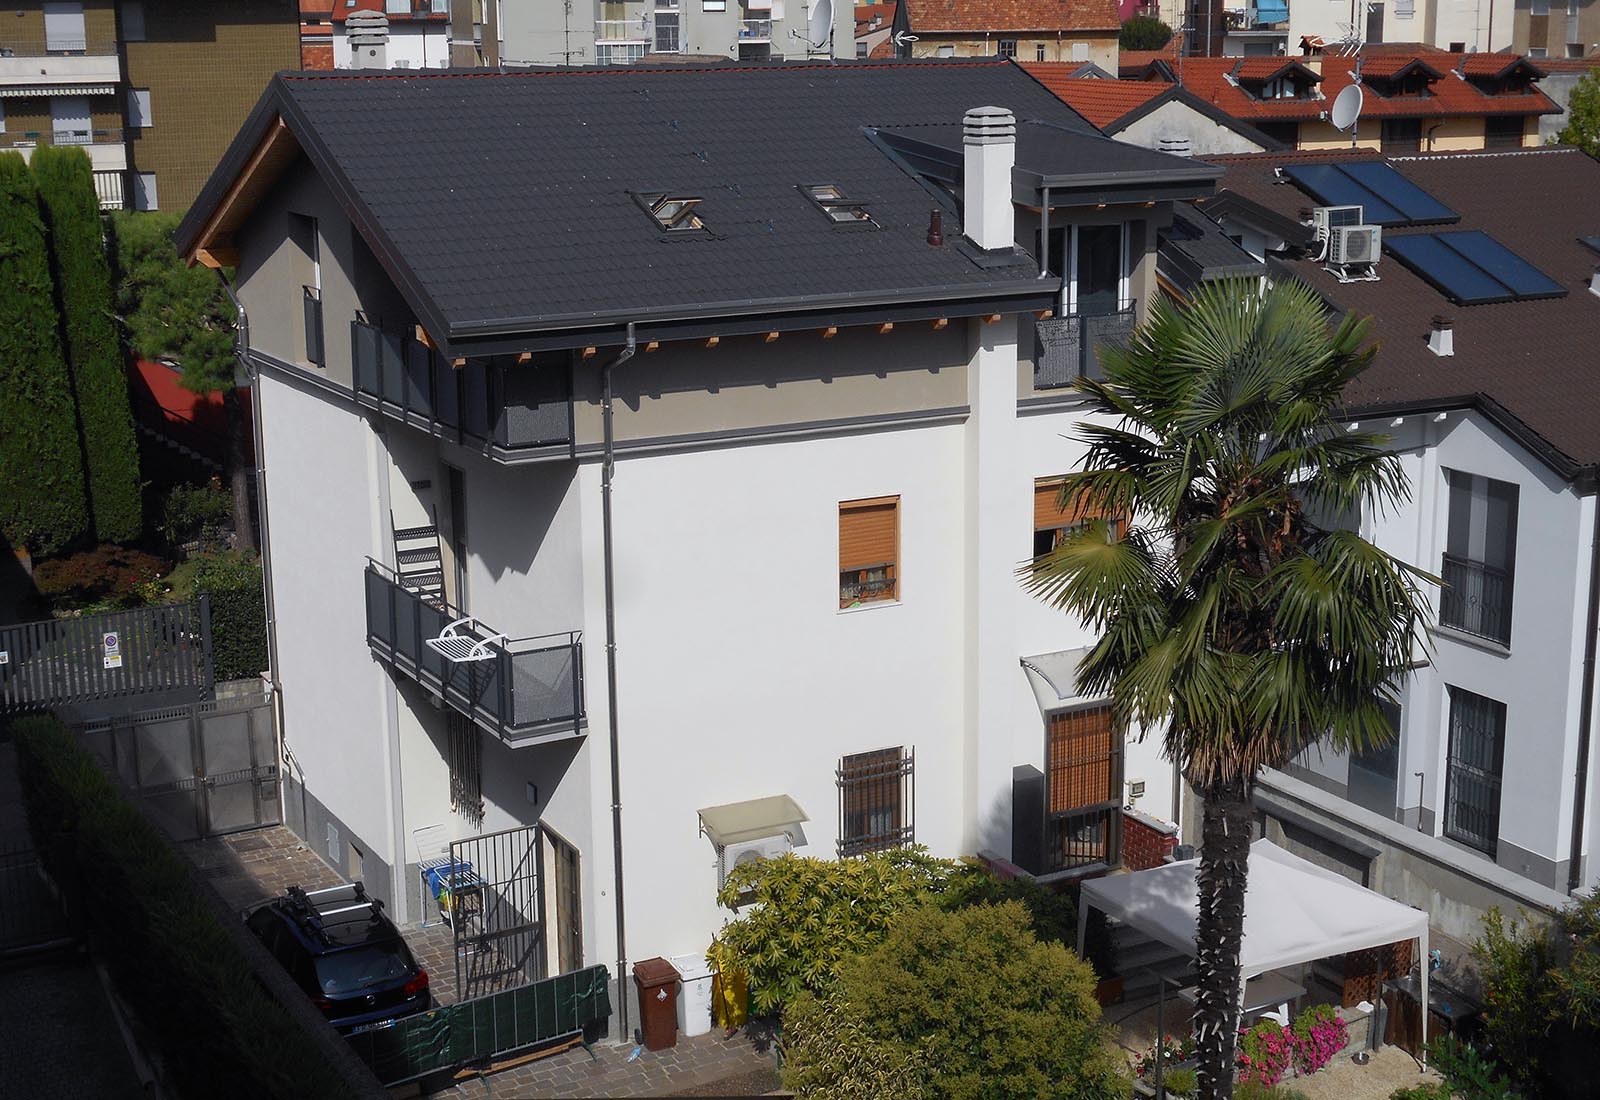 House in Crocefisso street in Rho - View